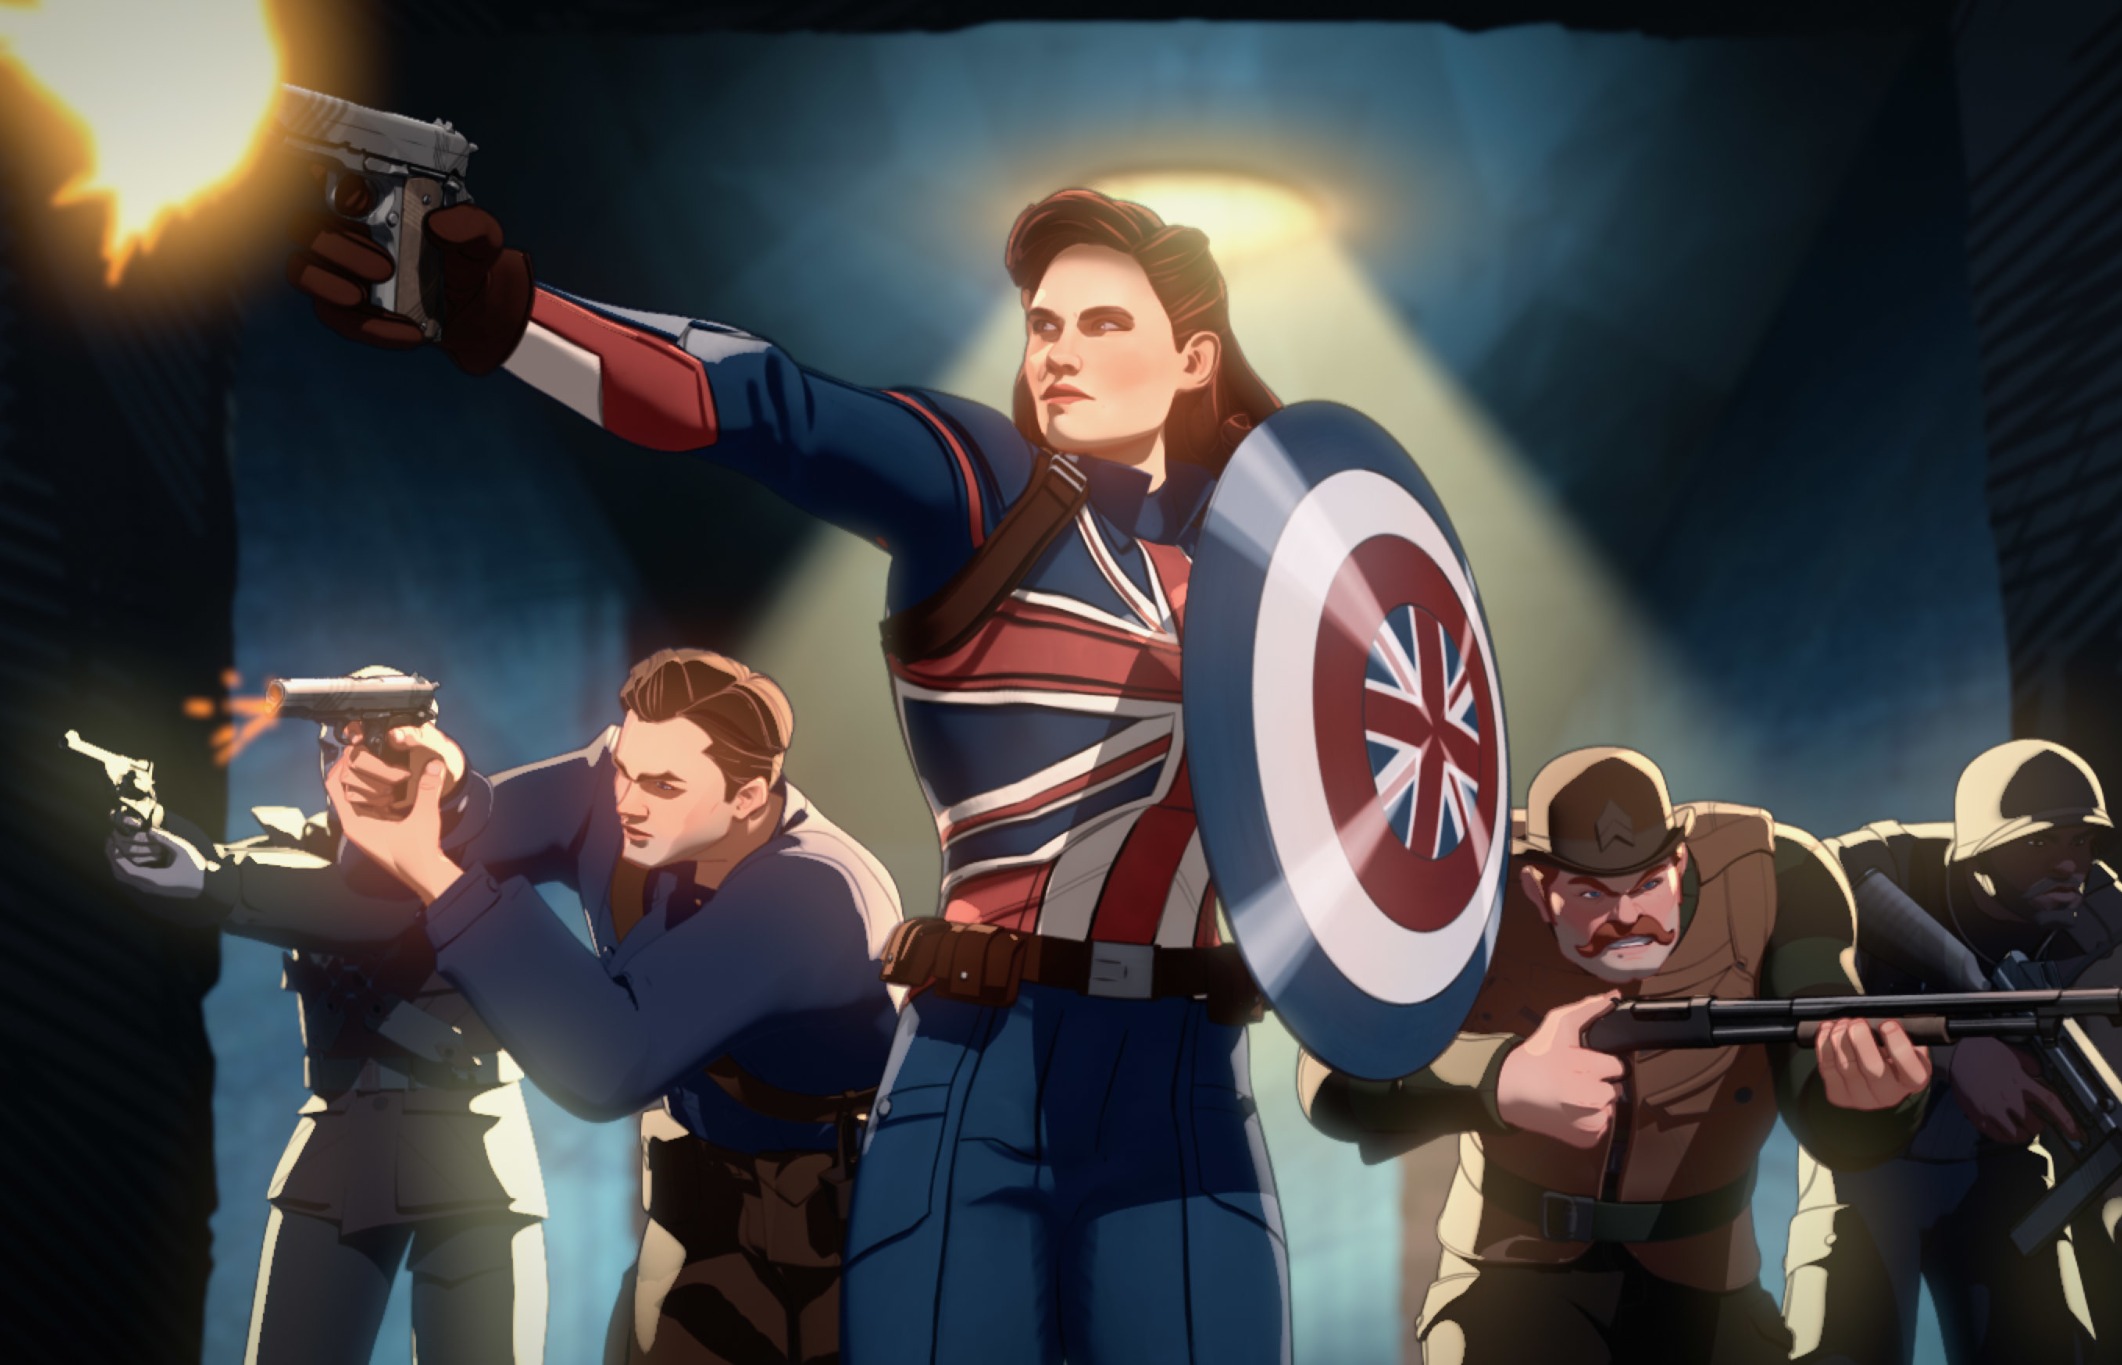 Marvel's What If...? scene showing Captain Carter wearing a costume with the British flag and holding a shield with the British flag. She's pointing a gun with the other hand, and two men behind her also hold guns.